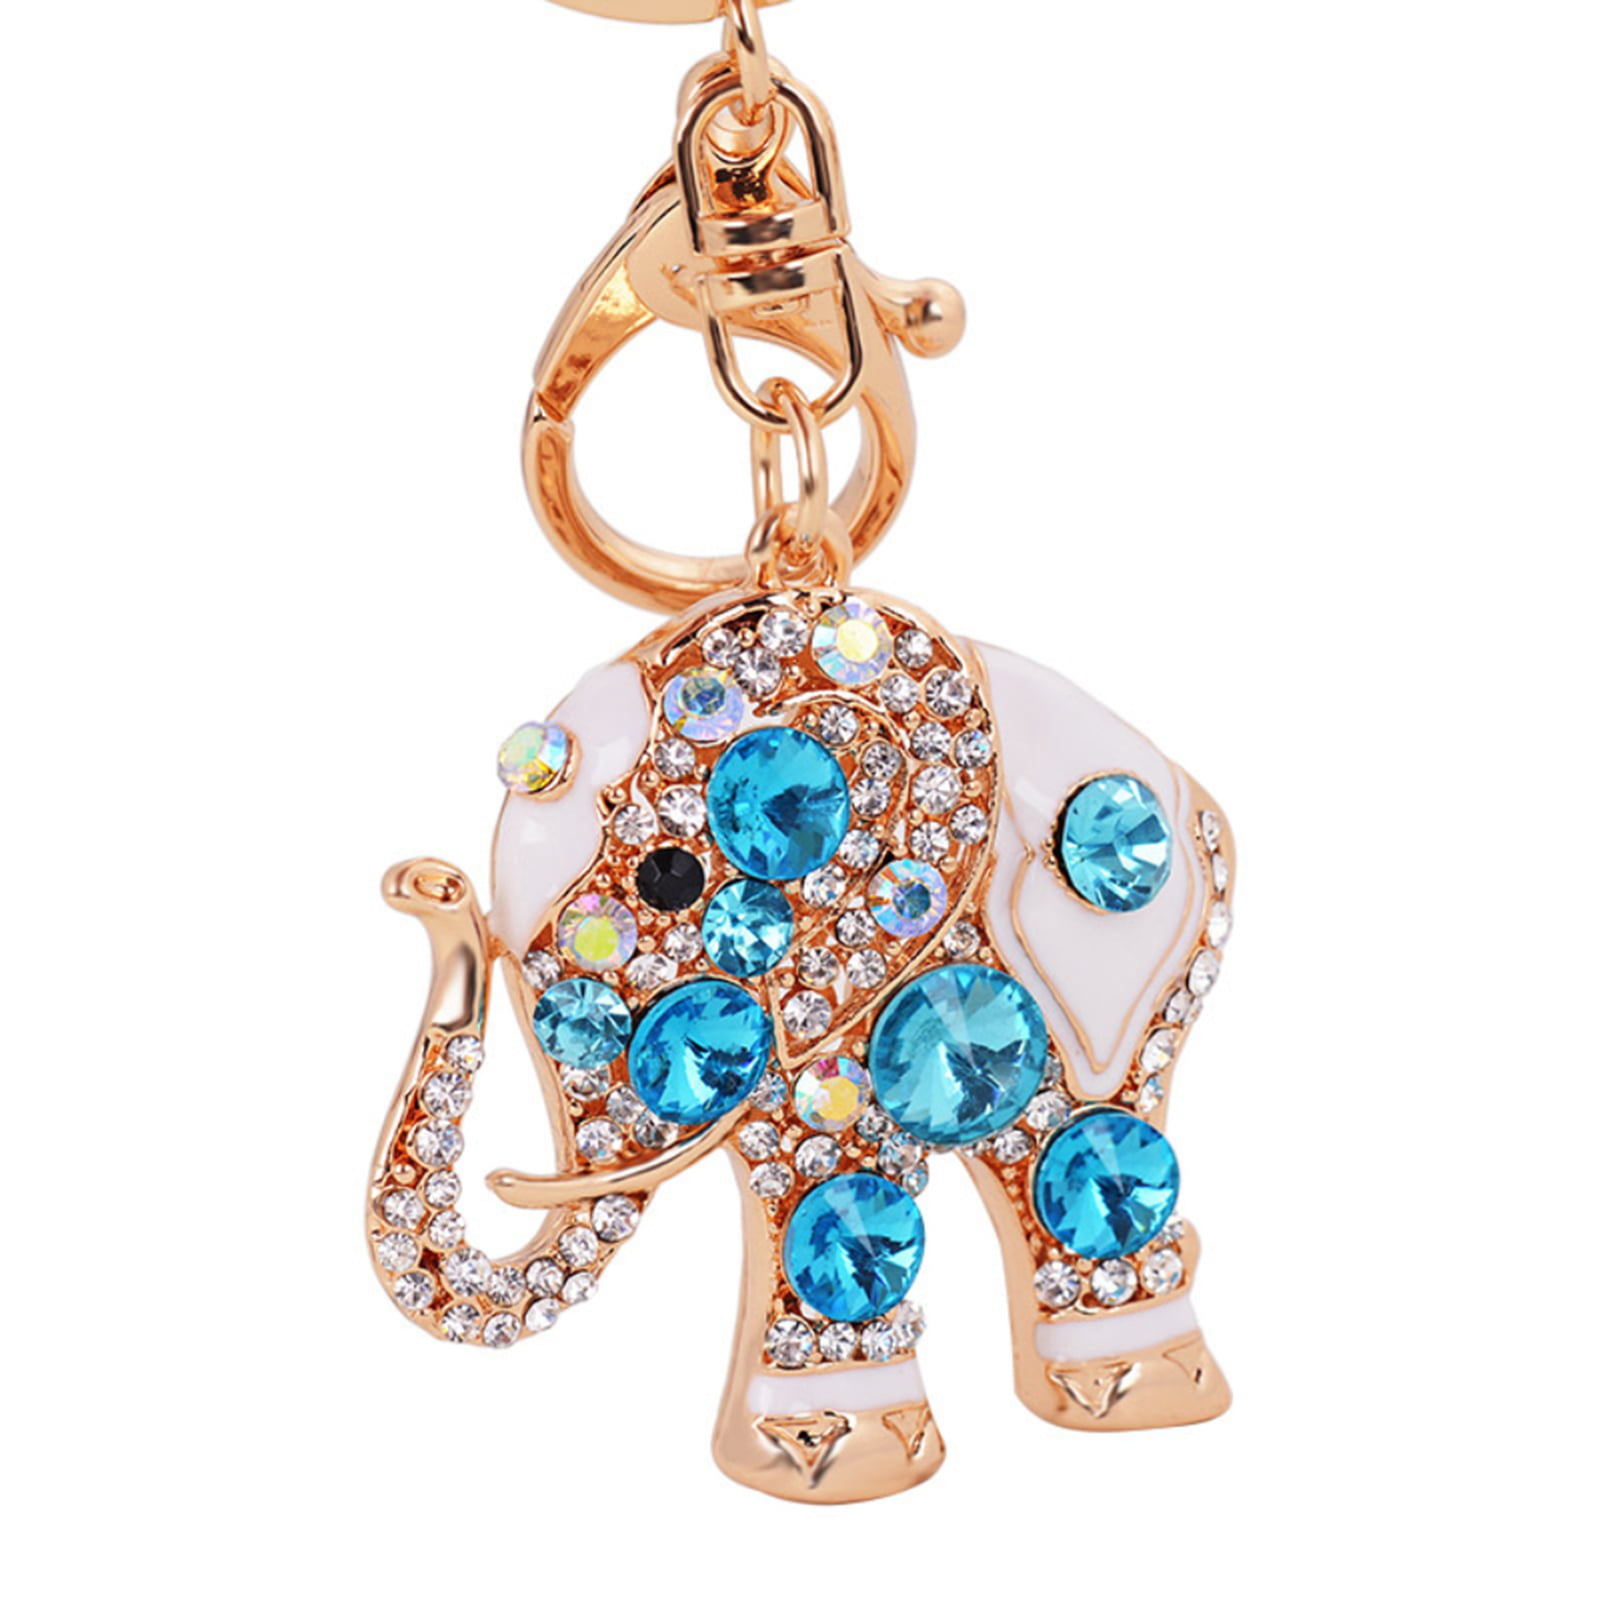 Good Luck Elephant Keychain With Crystals and Rhinestones Charm Gift 